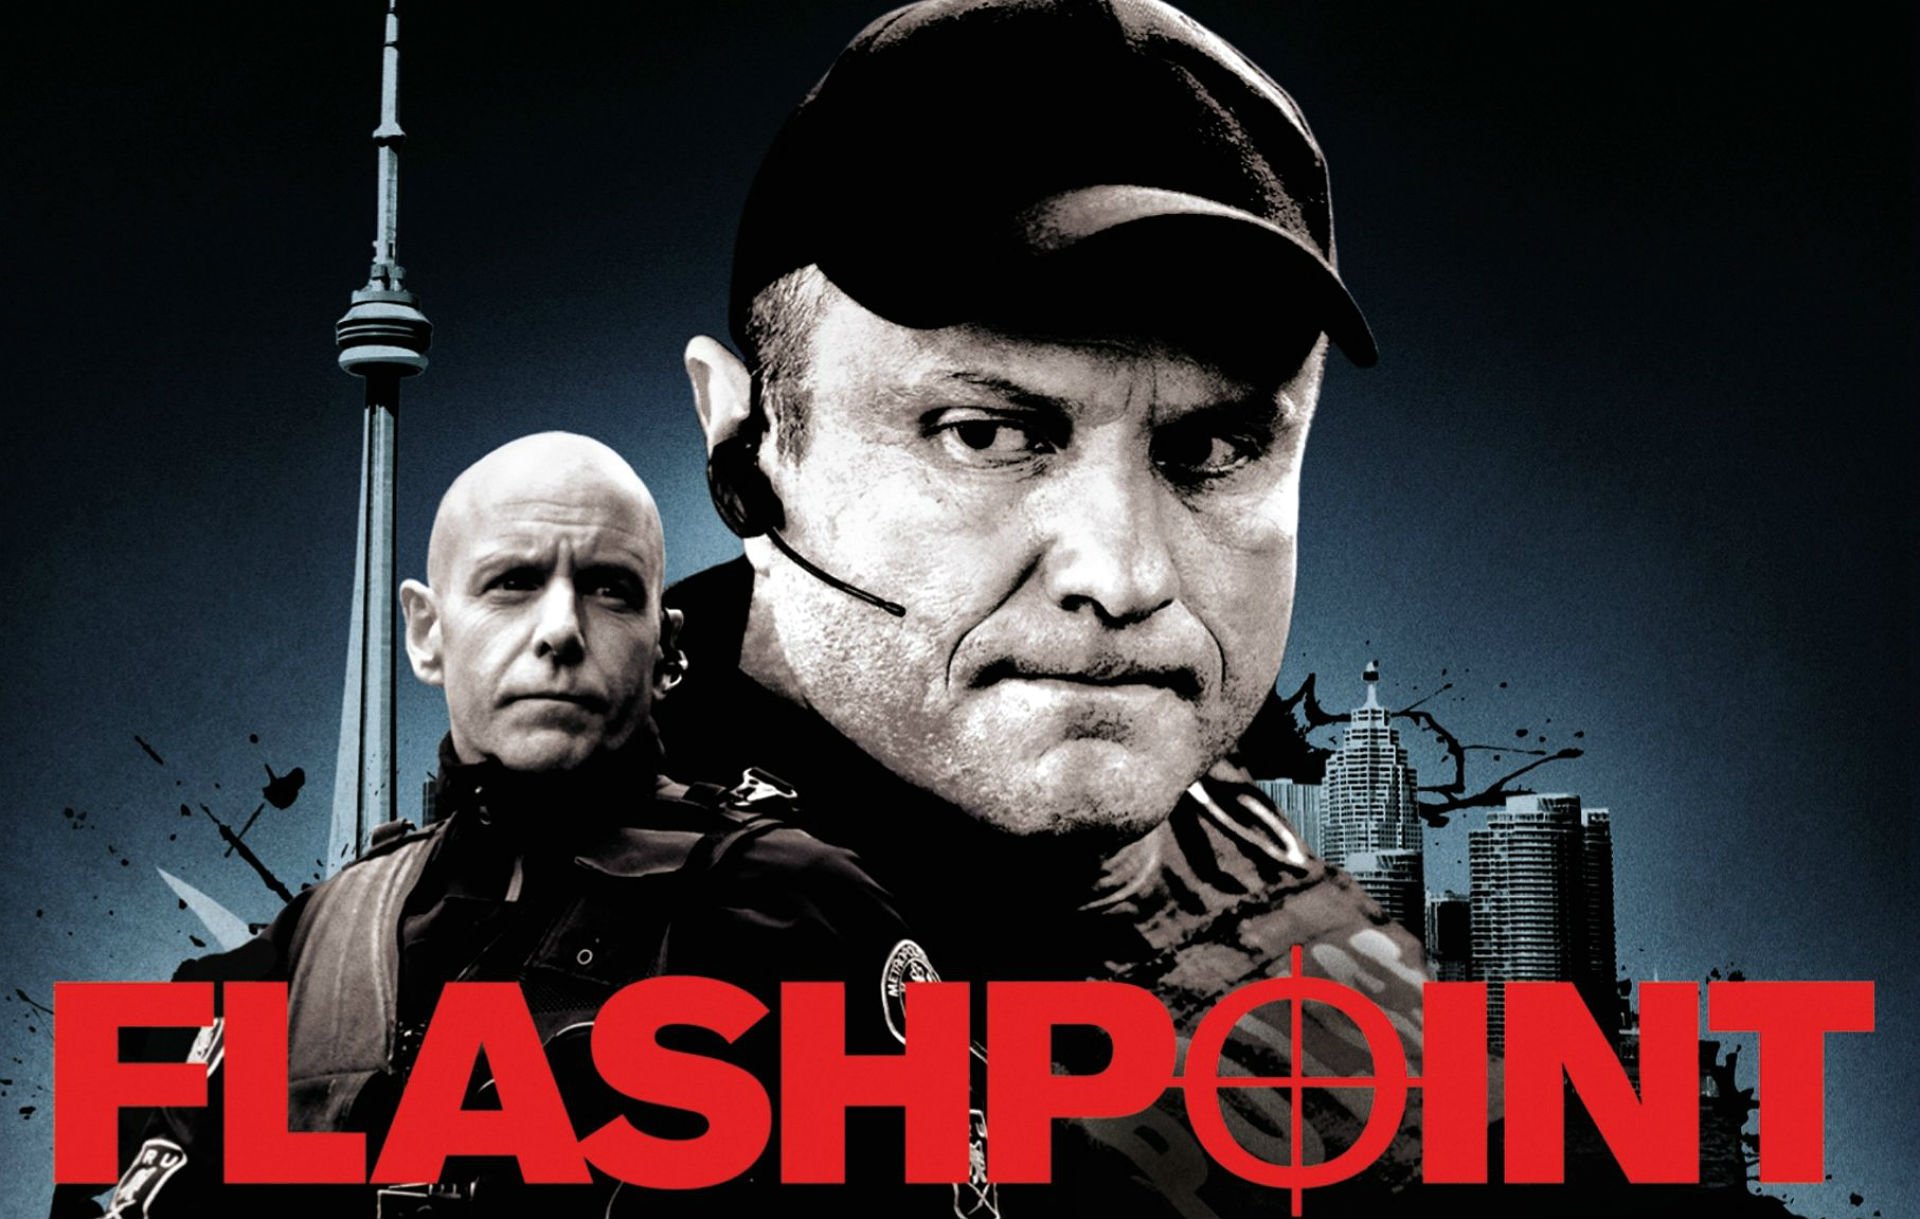 flashpoint, Action, Crime, Drama, Series,  41 Wallpaper